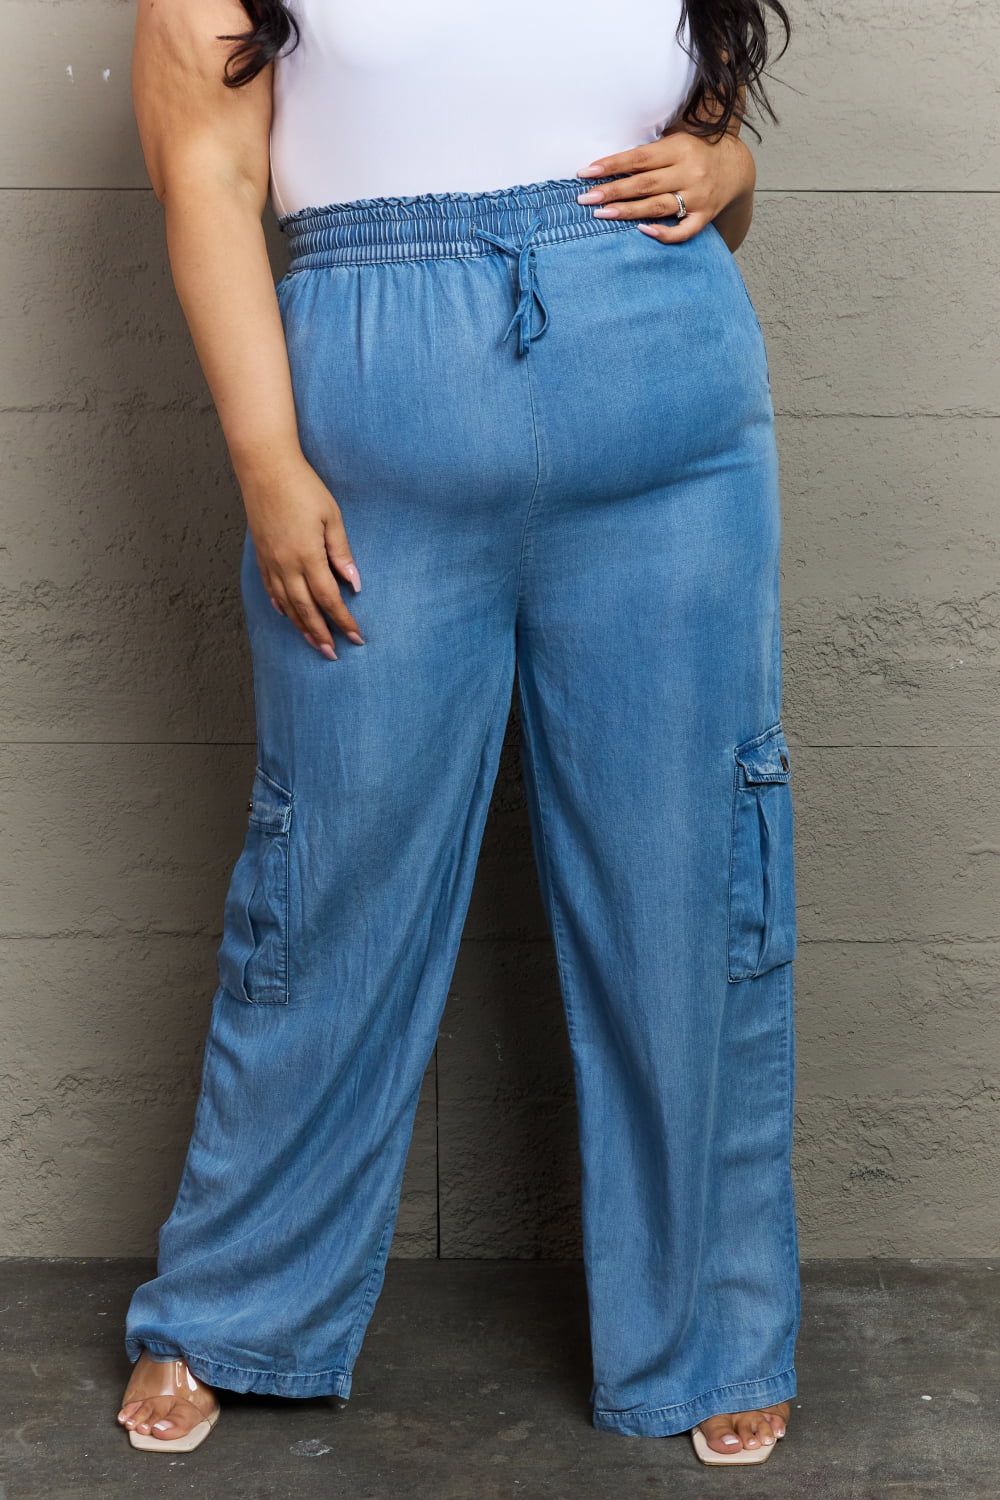 GeeGee Out Of Site Full Size Denim Cargo Pants free shipping -Oh Em Gee Boutique